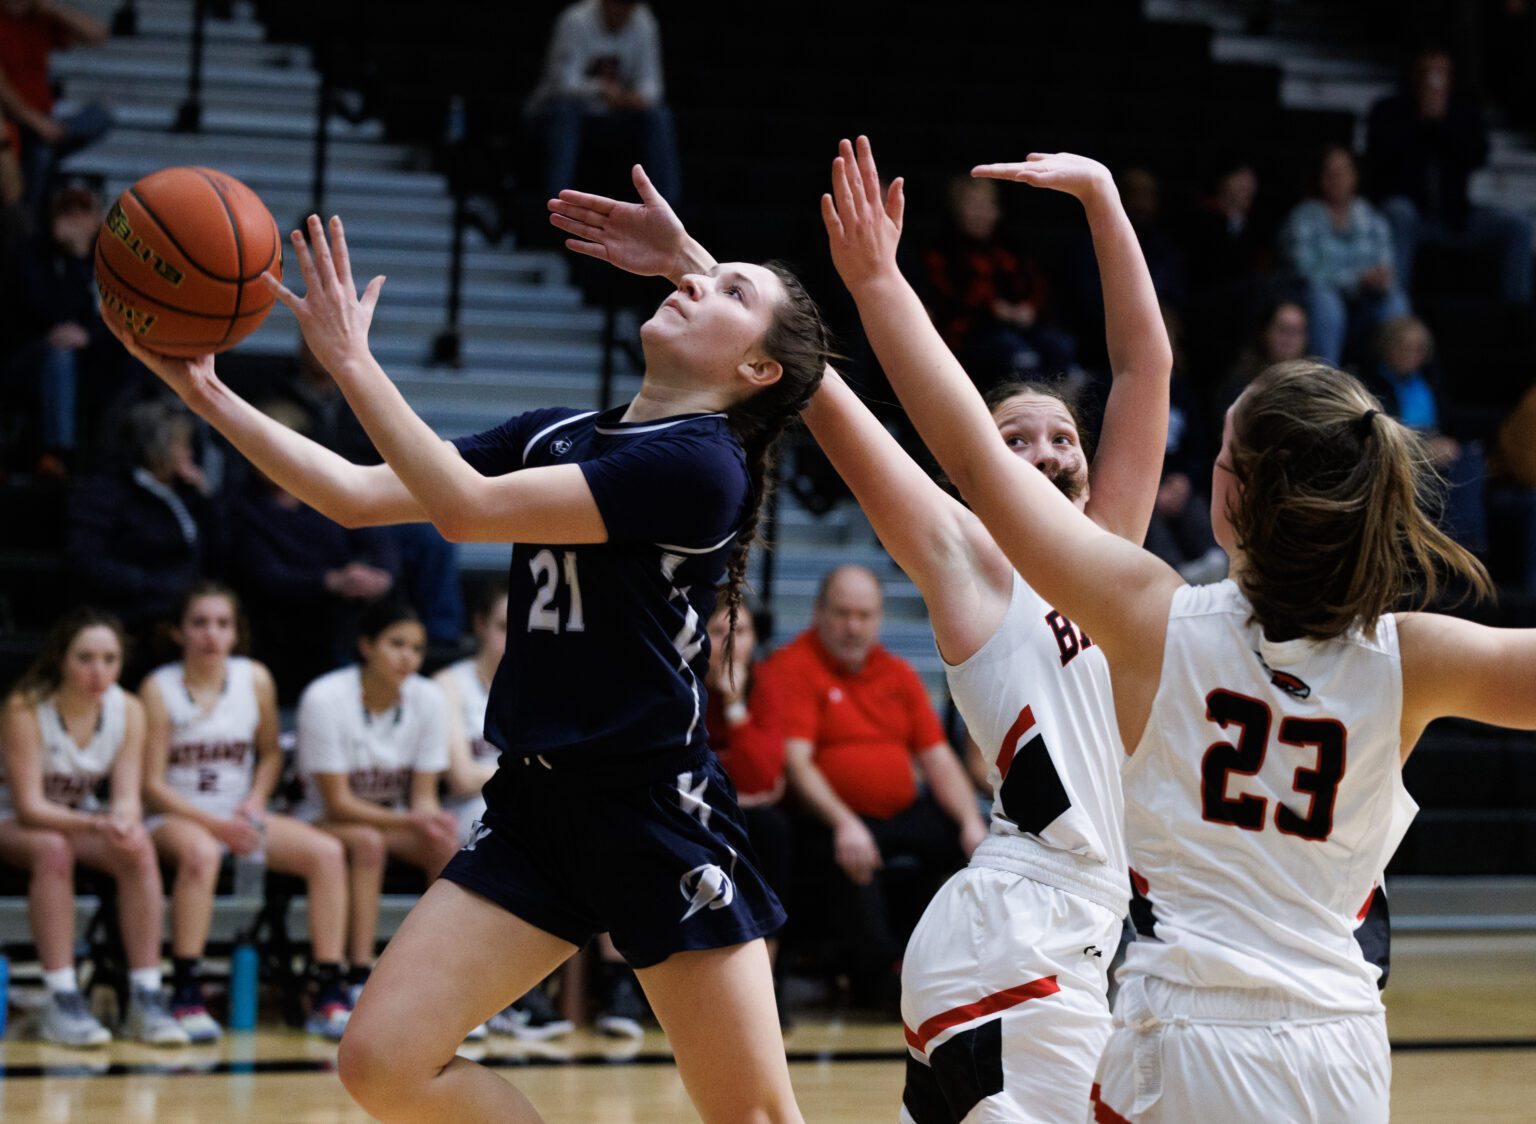 Squalicum’s Mari Binning jets past the Bellingham defense for a shot at the basket as the Storm beat Bellingham 56-32 on Jan. 21. Binning finished with a game-high 18 points.